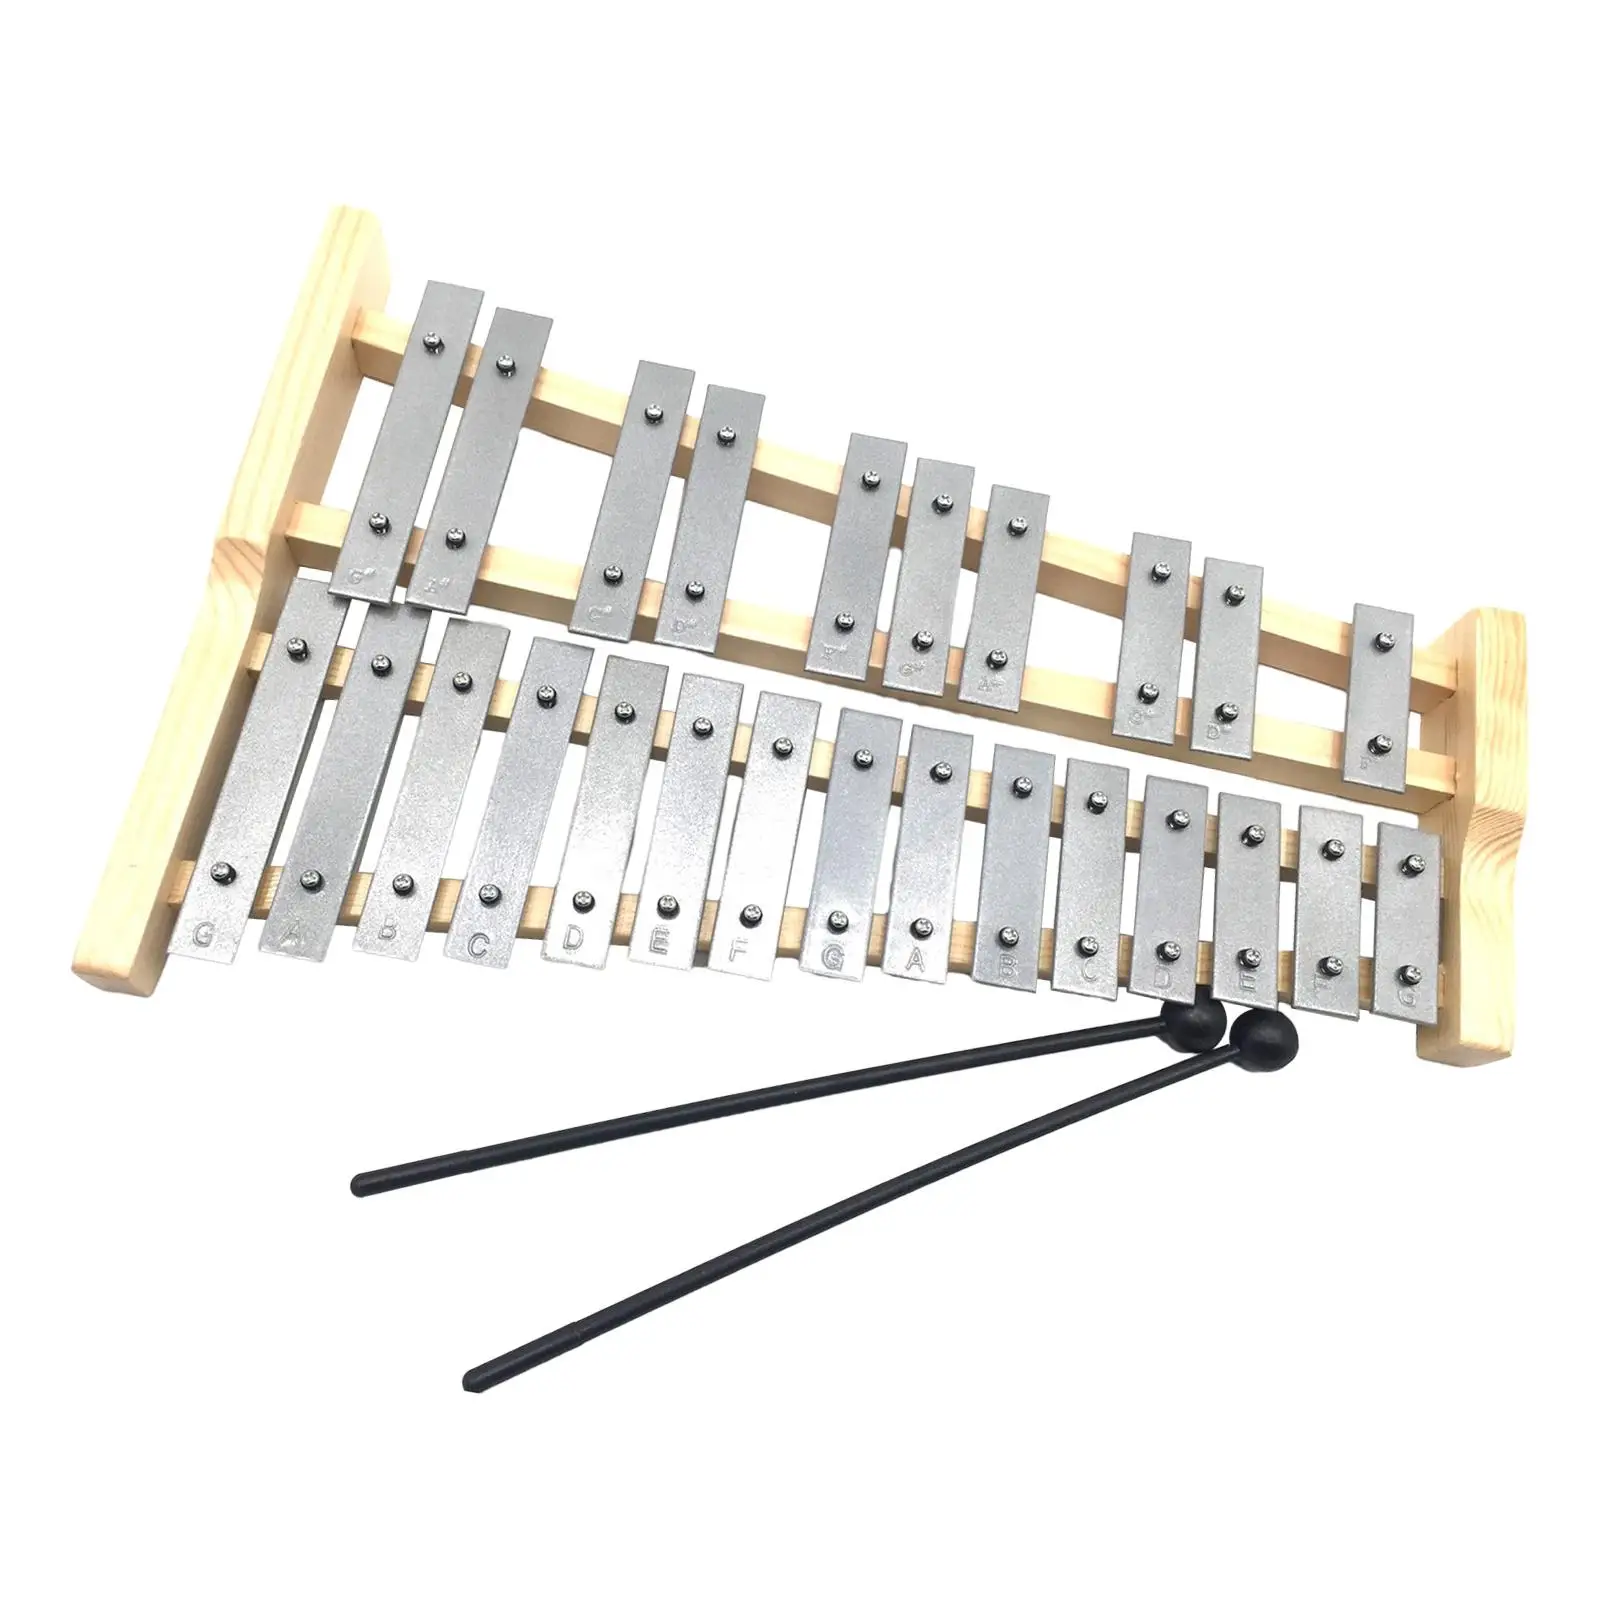 25 Note Glockenspiel Gifts for Beginners Compact Aluminum Xylophone Musical Educational Tuned Glockenspiel Musical Instrument